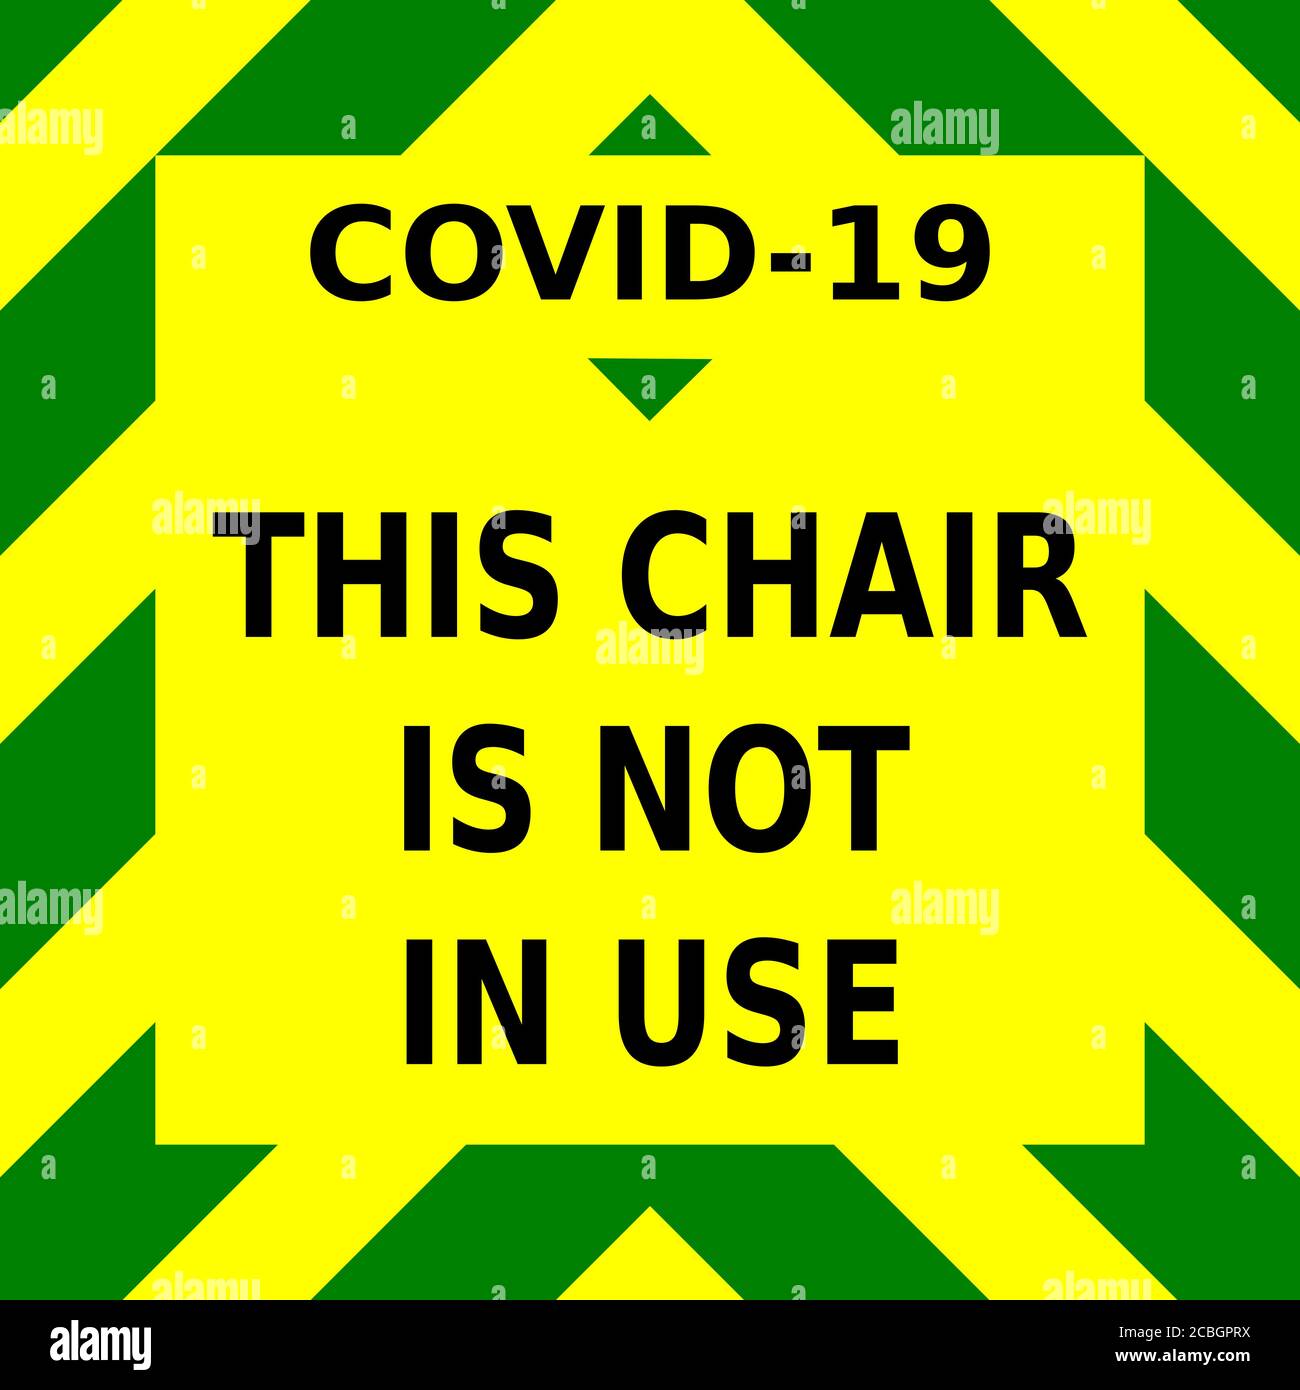 Green and yellow vector graphic, informing people that this chair is not in use, as part of the measures to help stop the spread of the covid-19 virus Stock Vector